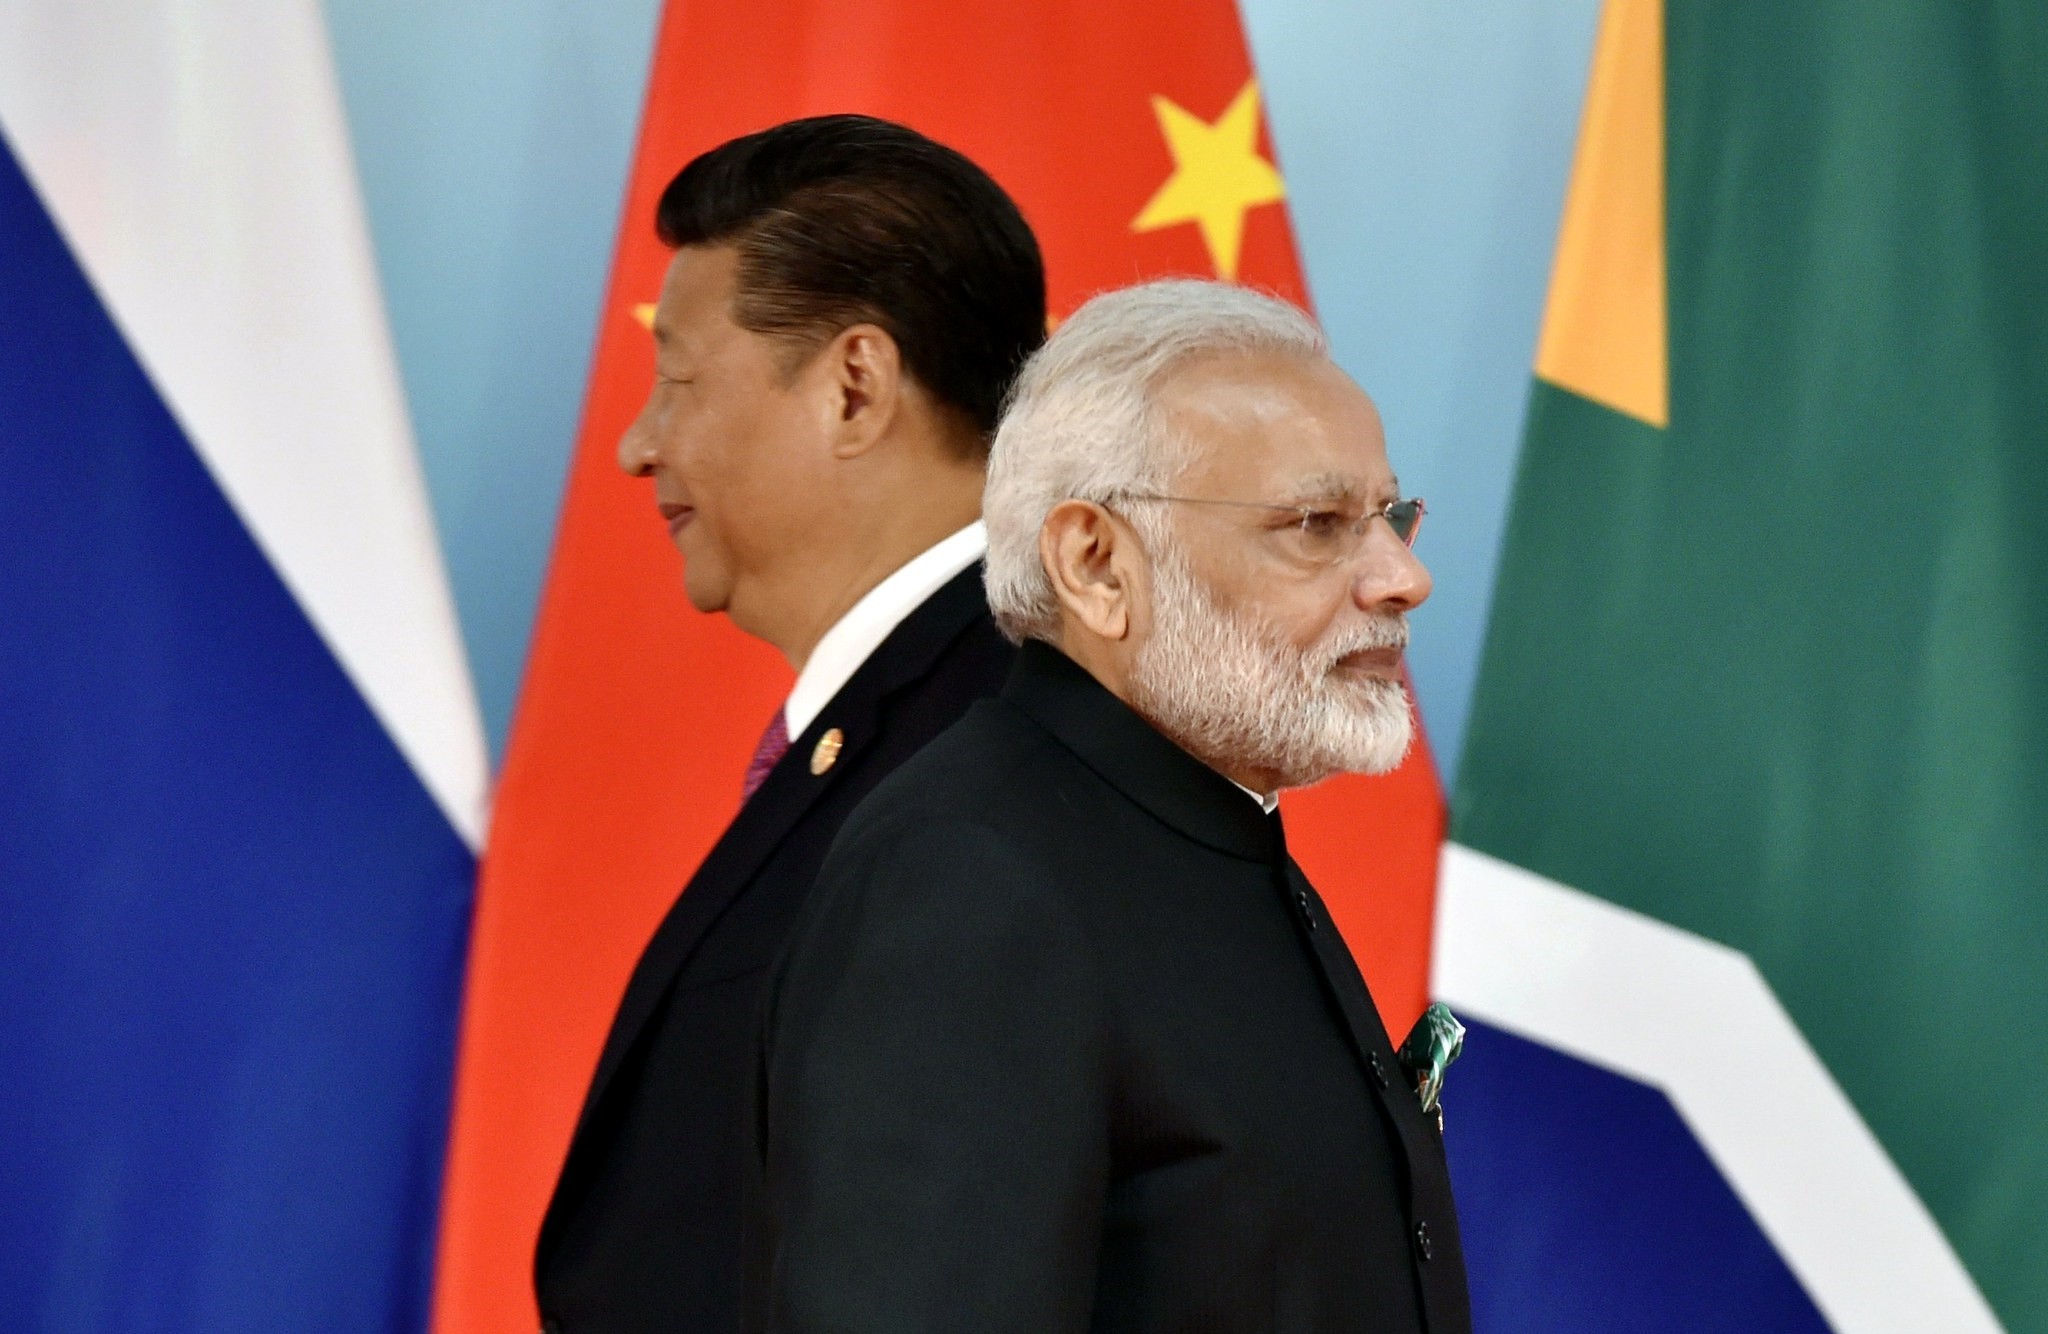 Chinese President Xi Jinping (L) and Indian Prime Minister Narendra Modi walk past each other as they attend a group photo session during the 2017 BRICS Summit in Xiamen, the Fujian province, China, Sept. 4.